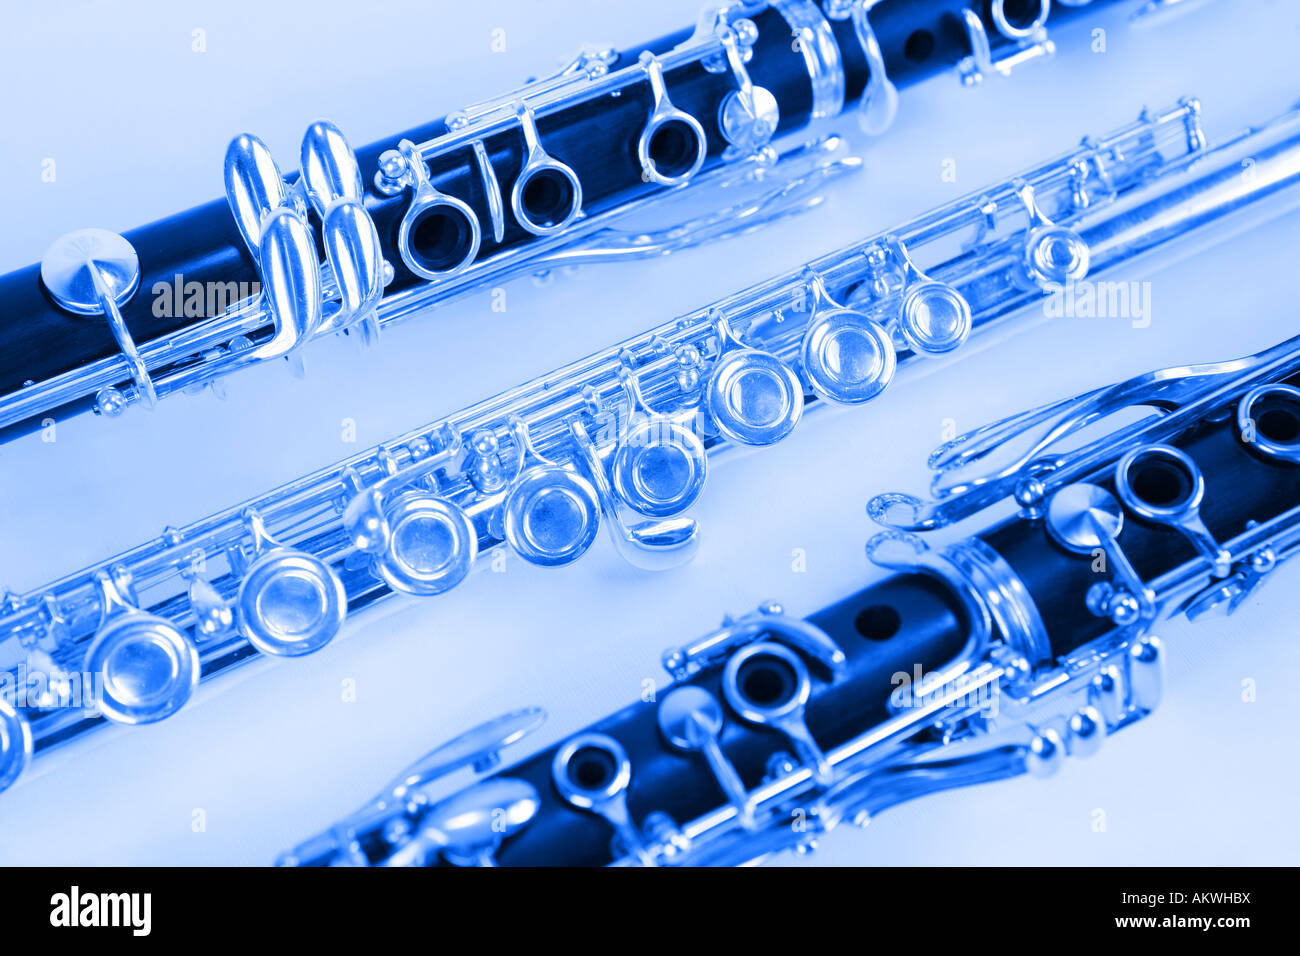 Two Clarinets and a silver flute in blue Stock Photo